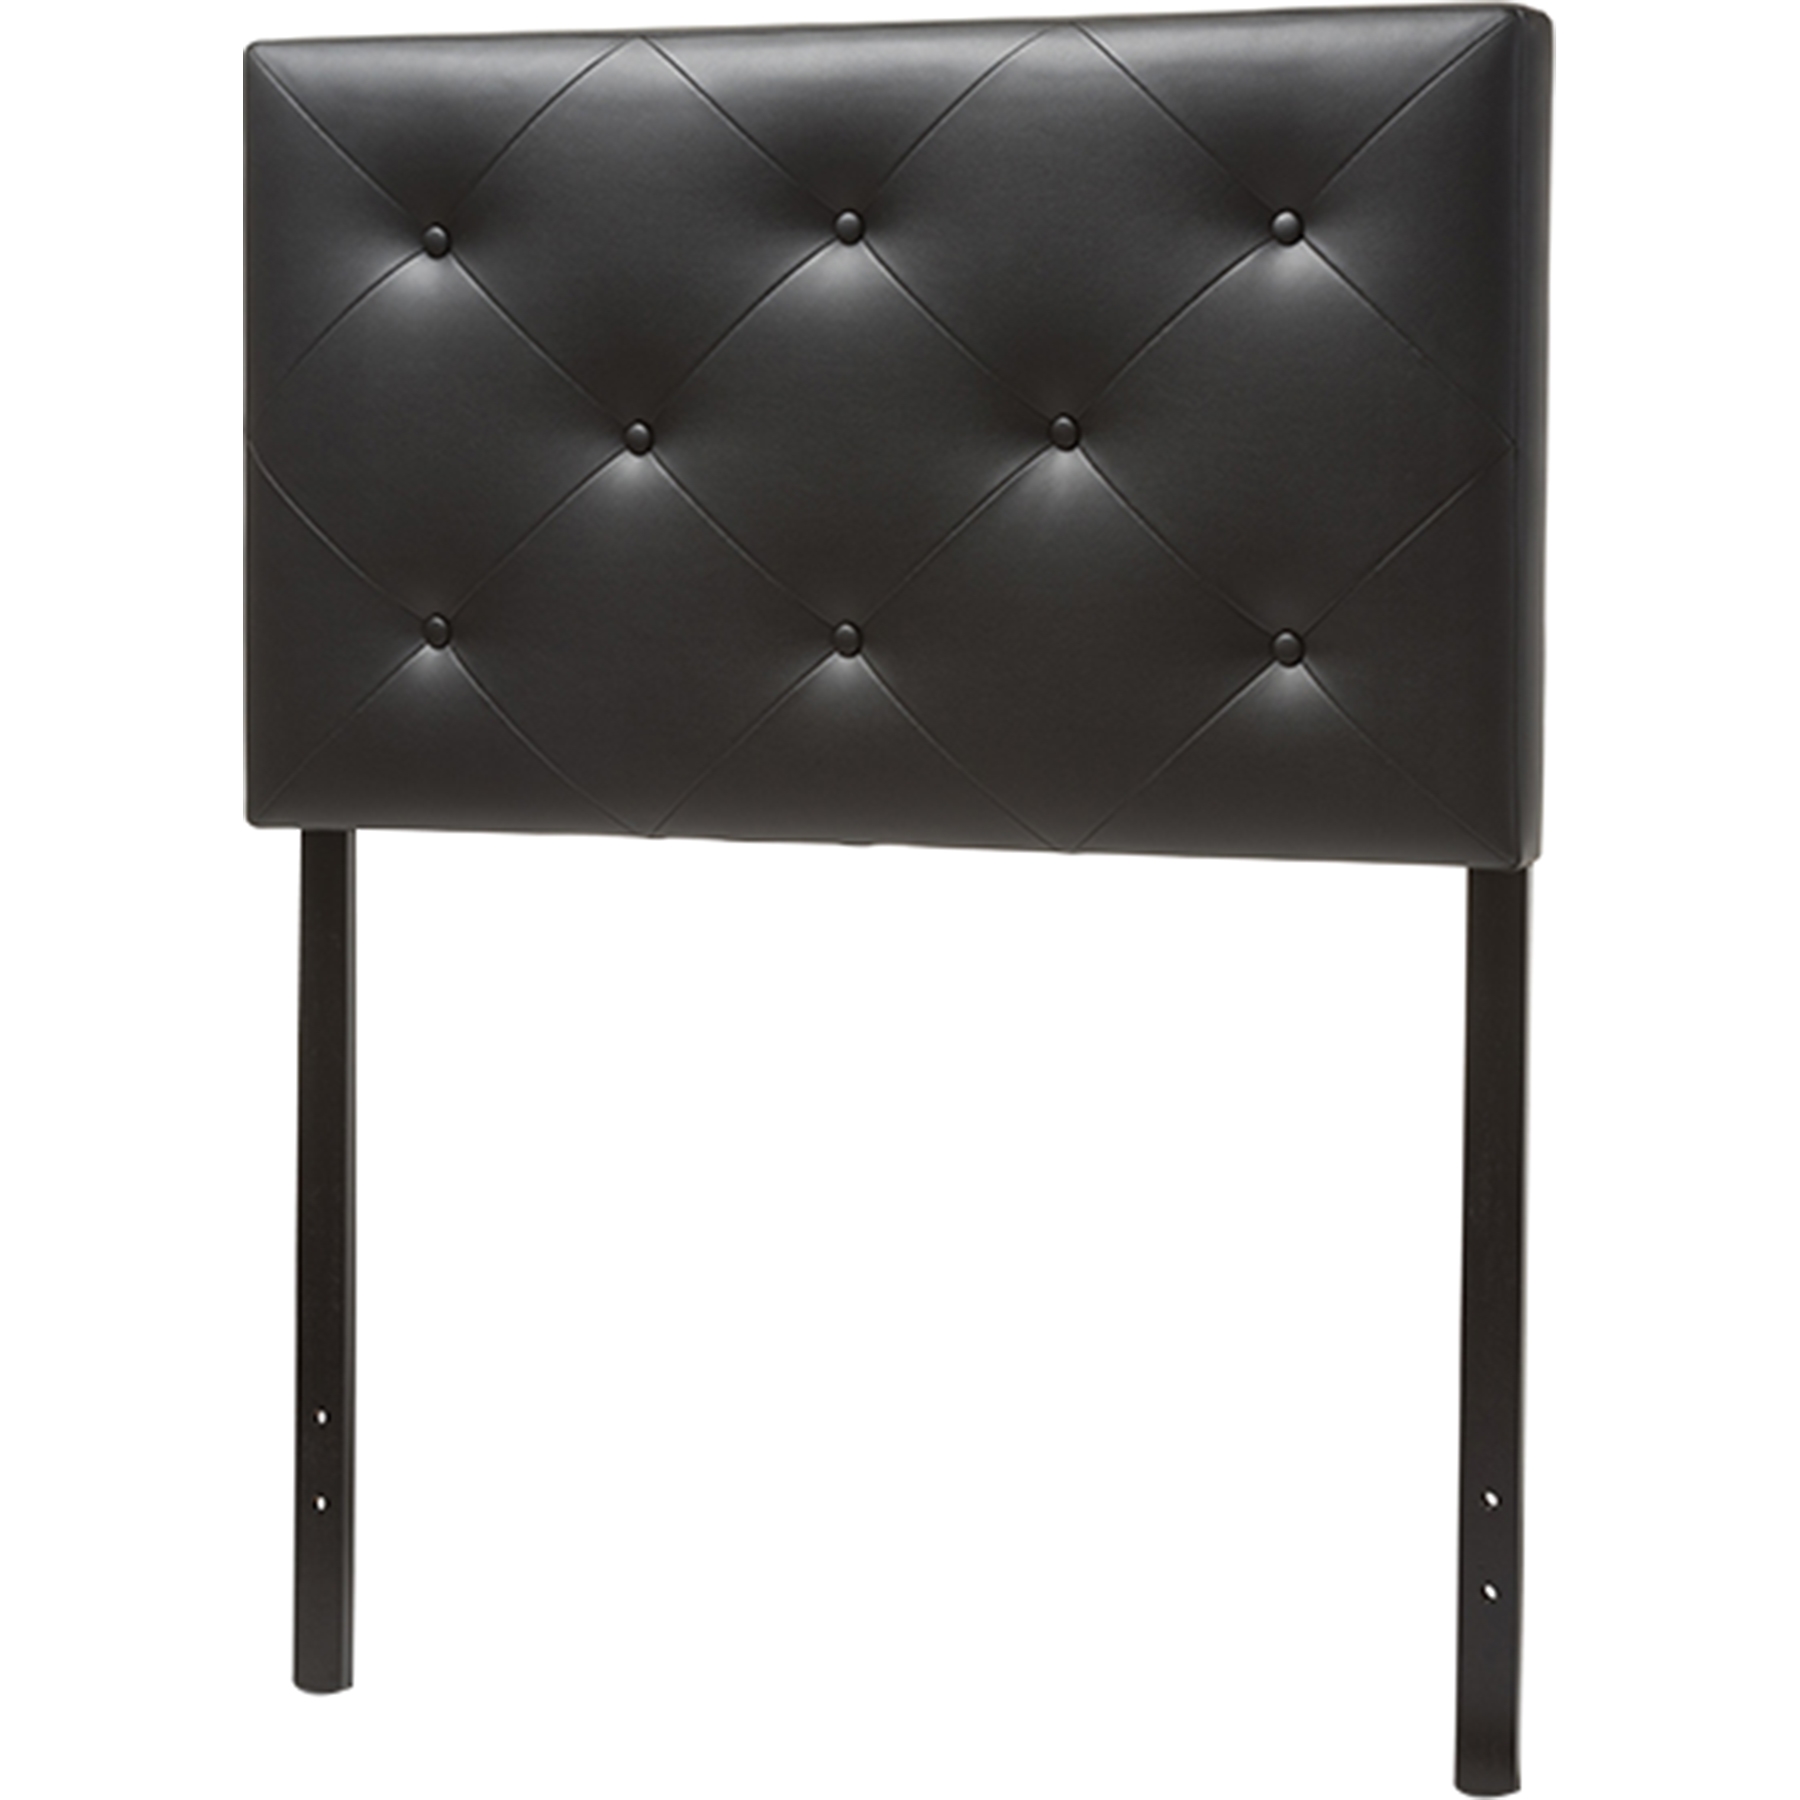 Details about   Baltimore Faux Leather Upholstered Twin Headboard 